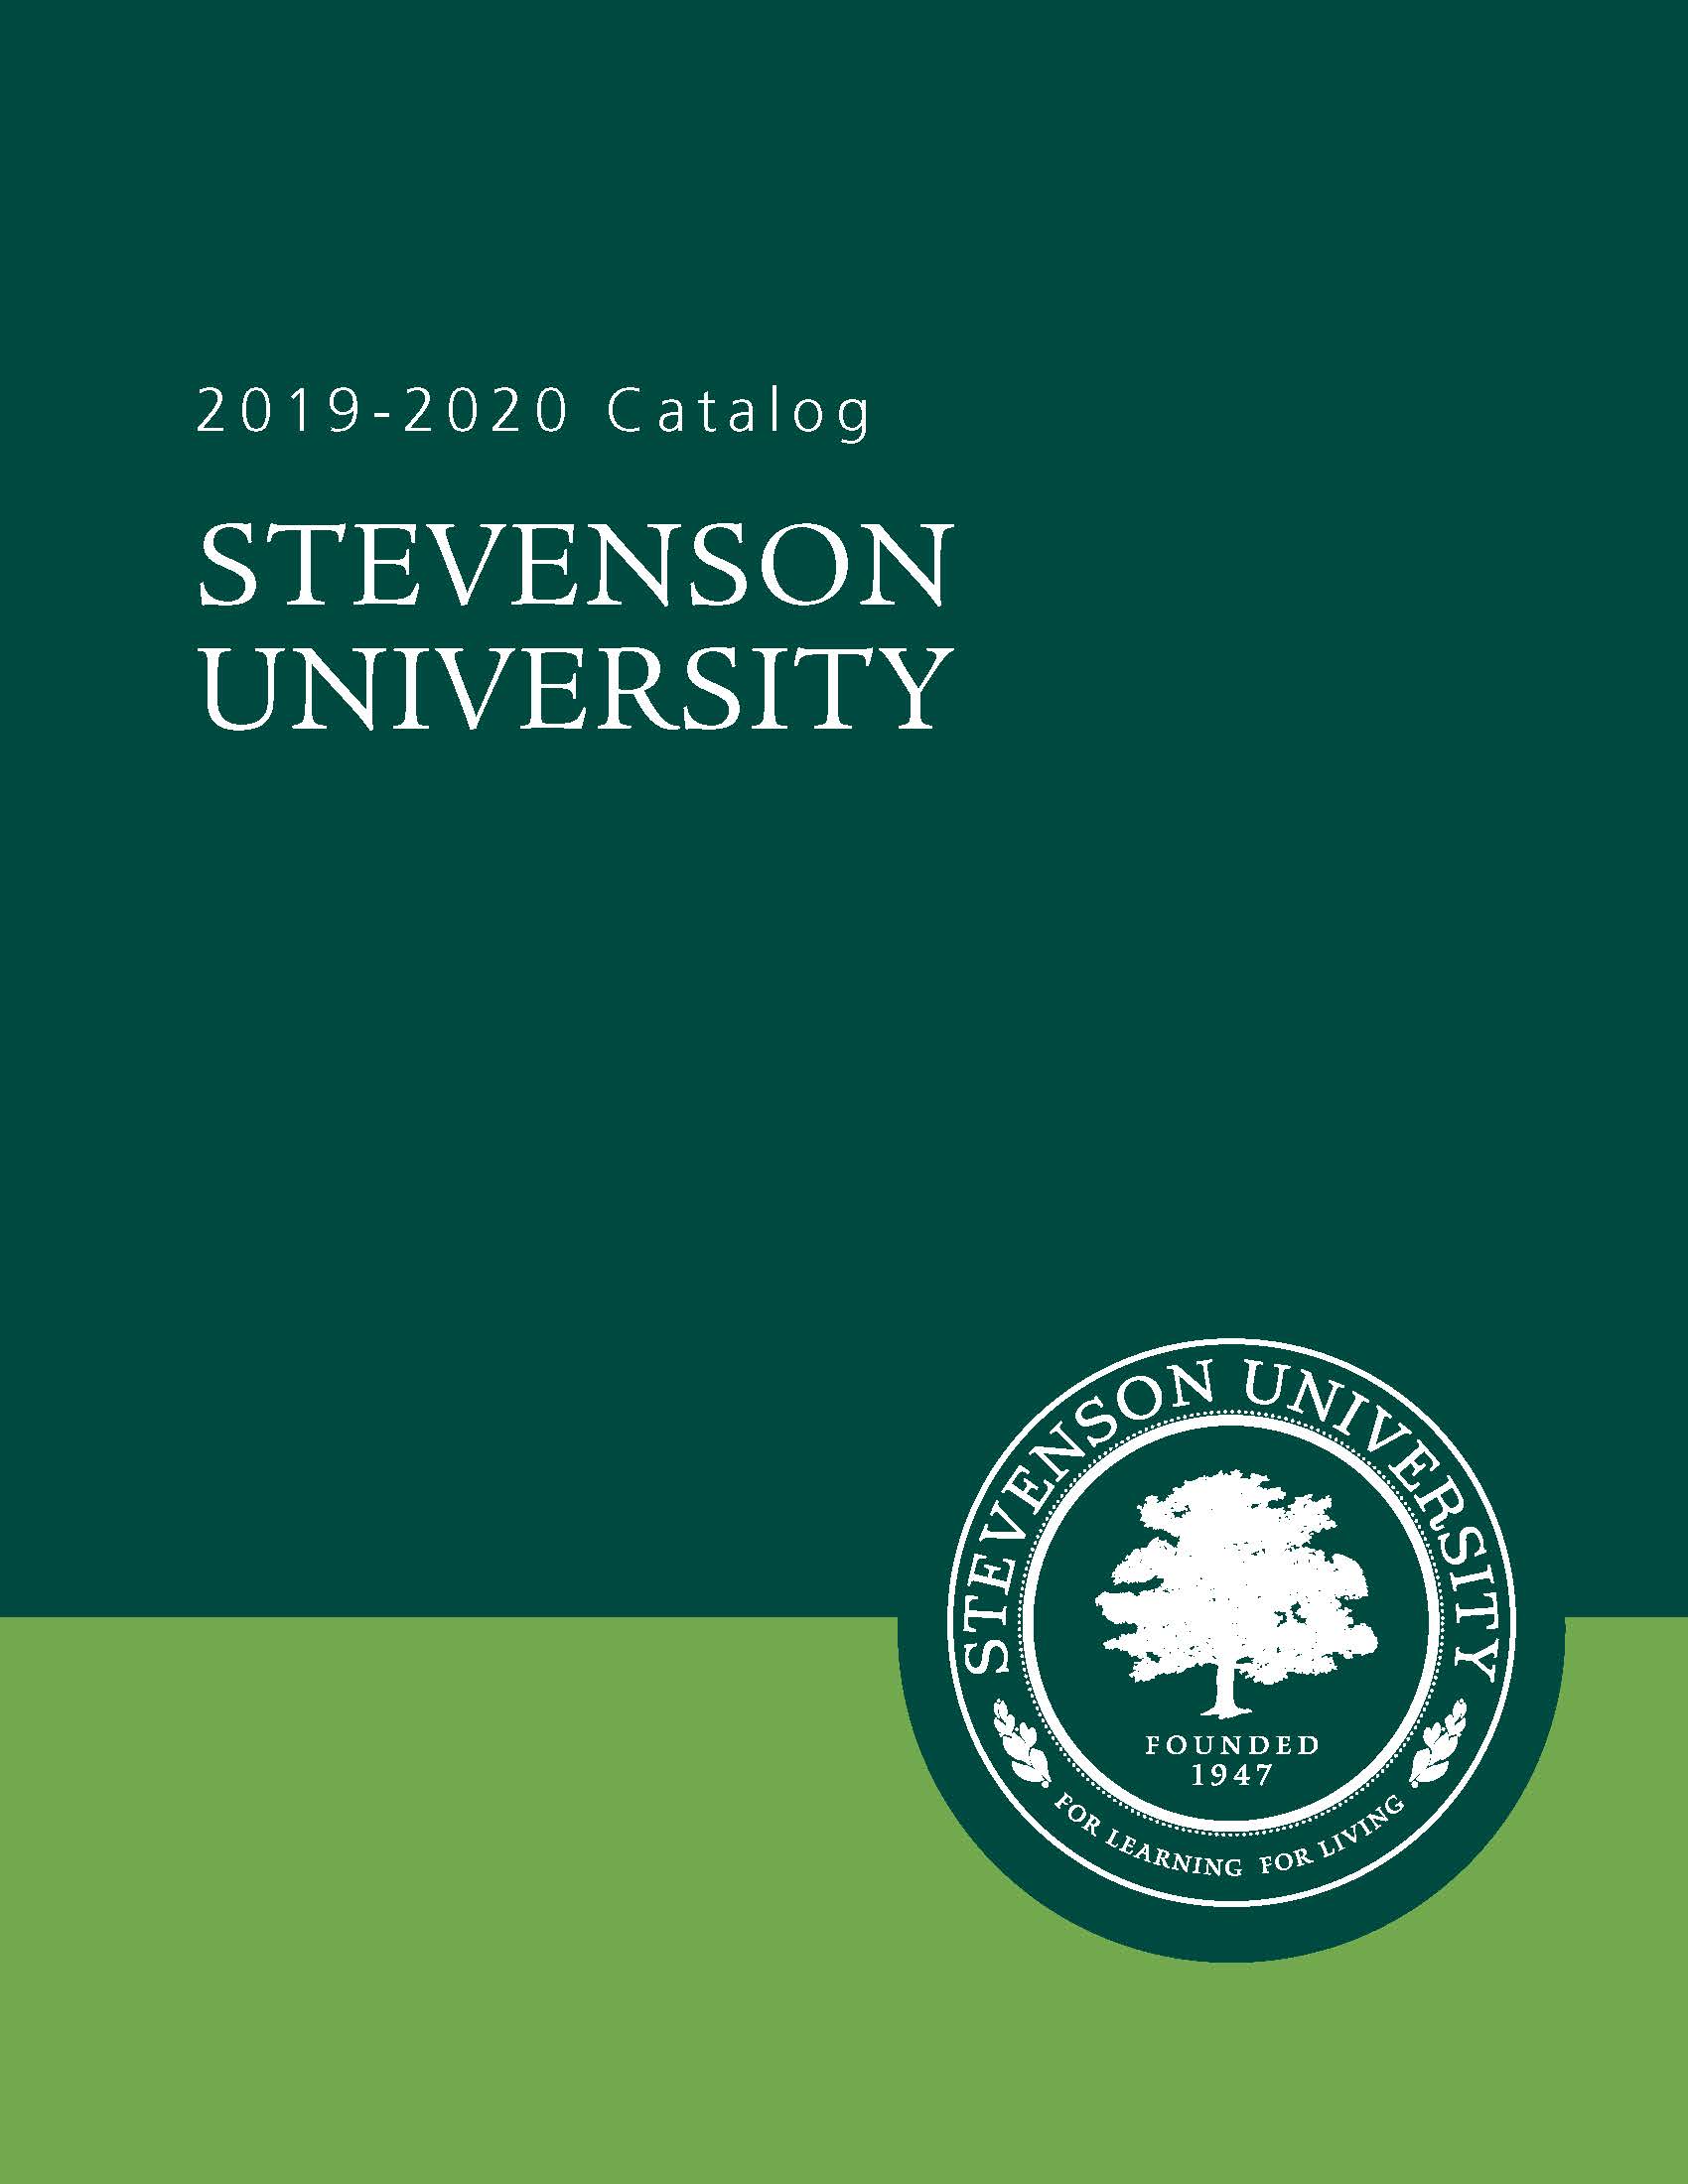 This is a picture of the 2019 - 2020 catalog cover.